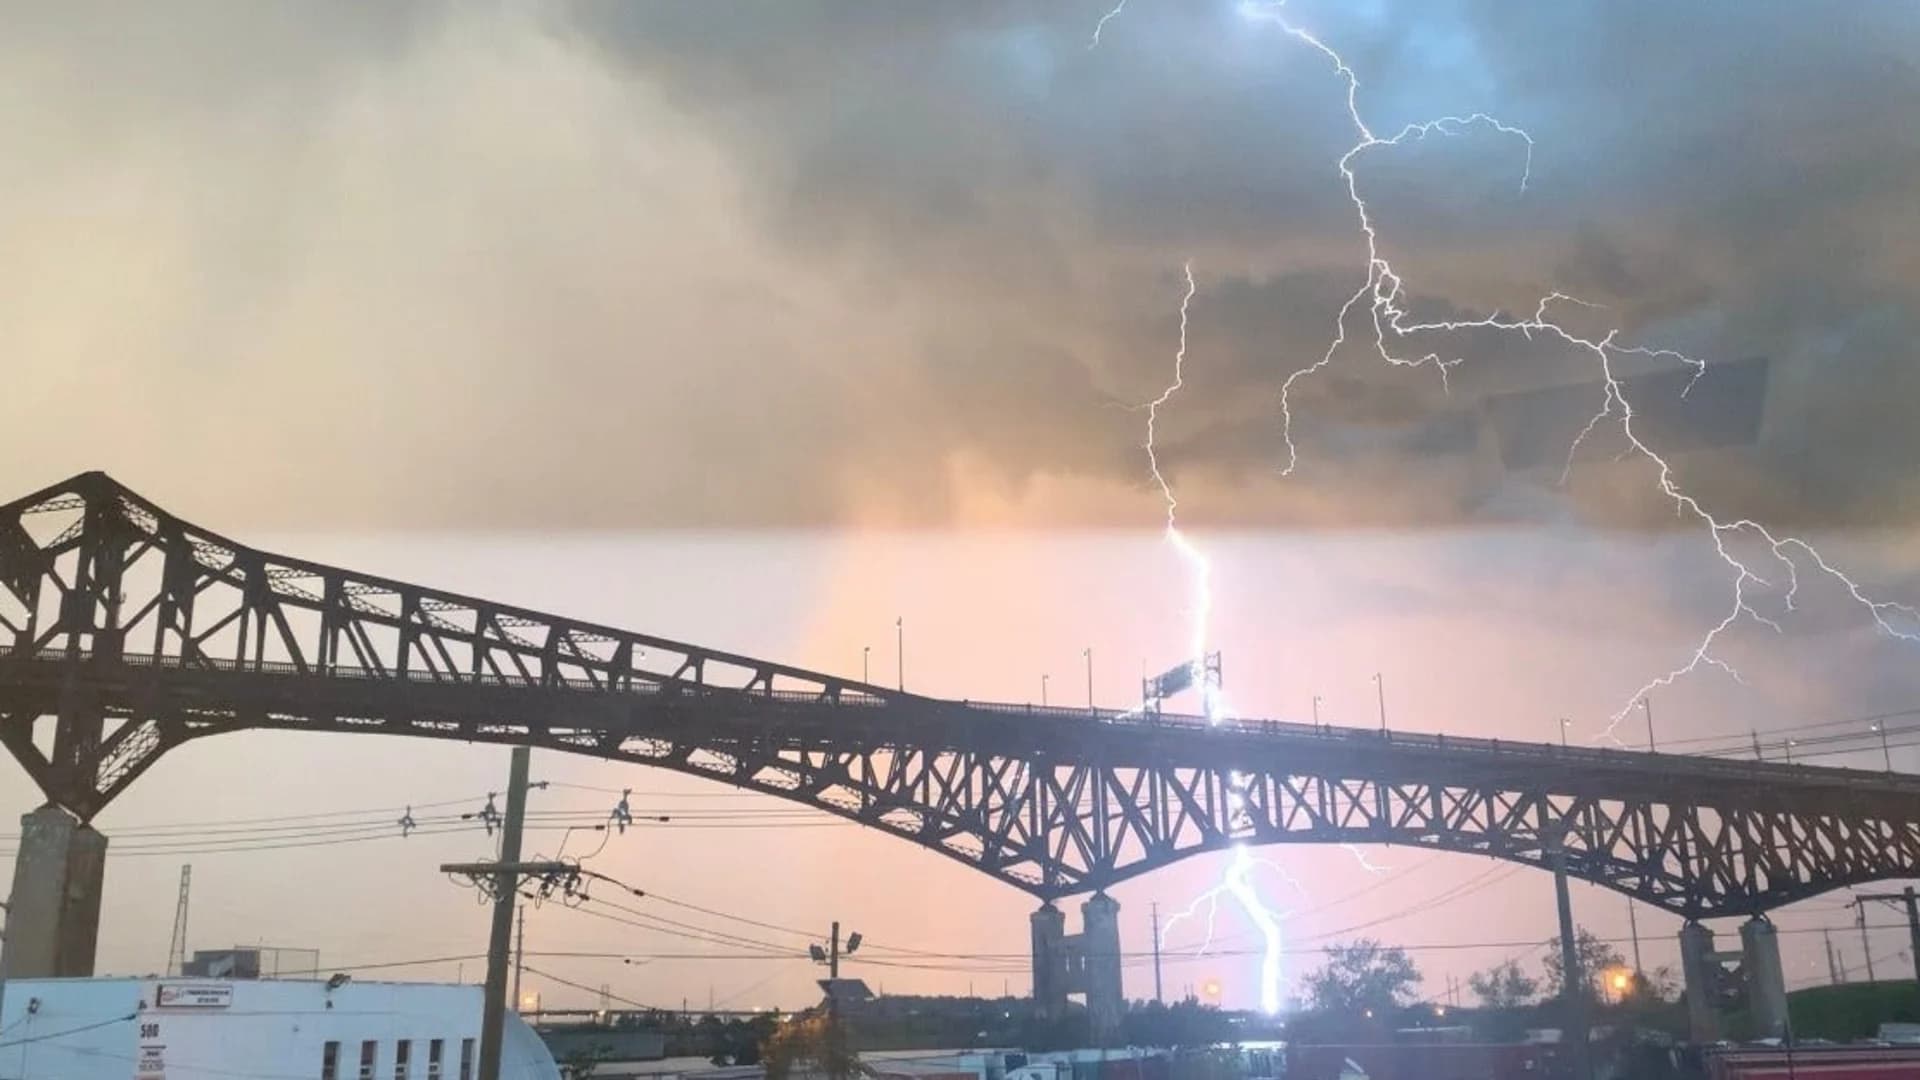 Your Photos: Wild storms this summer across the tri-state